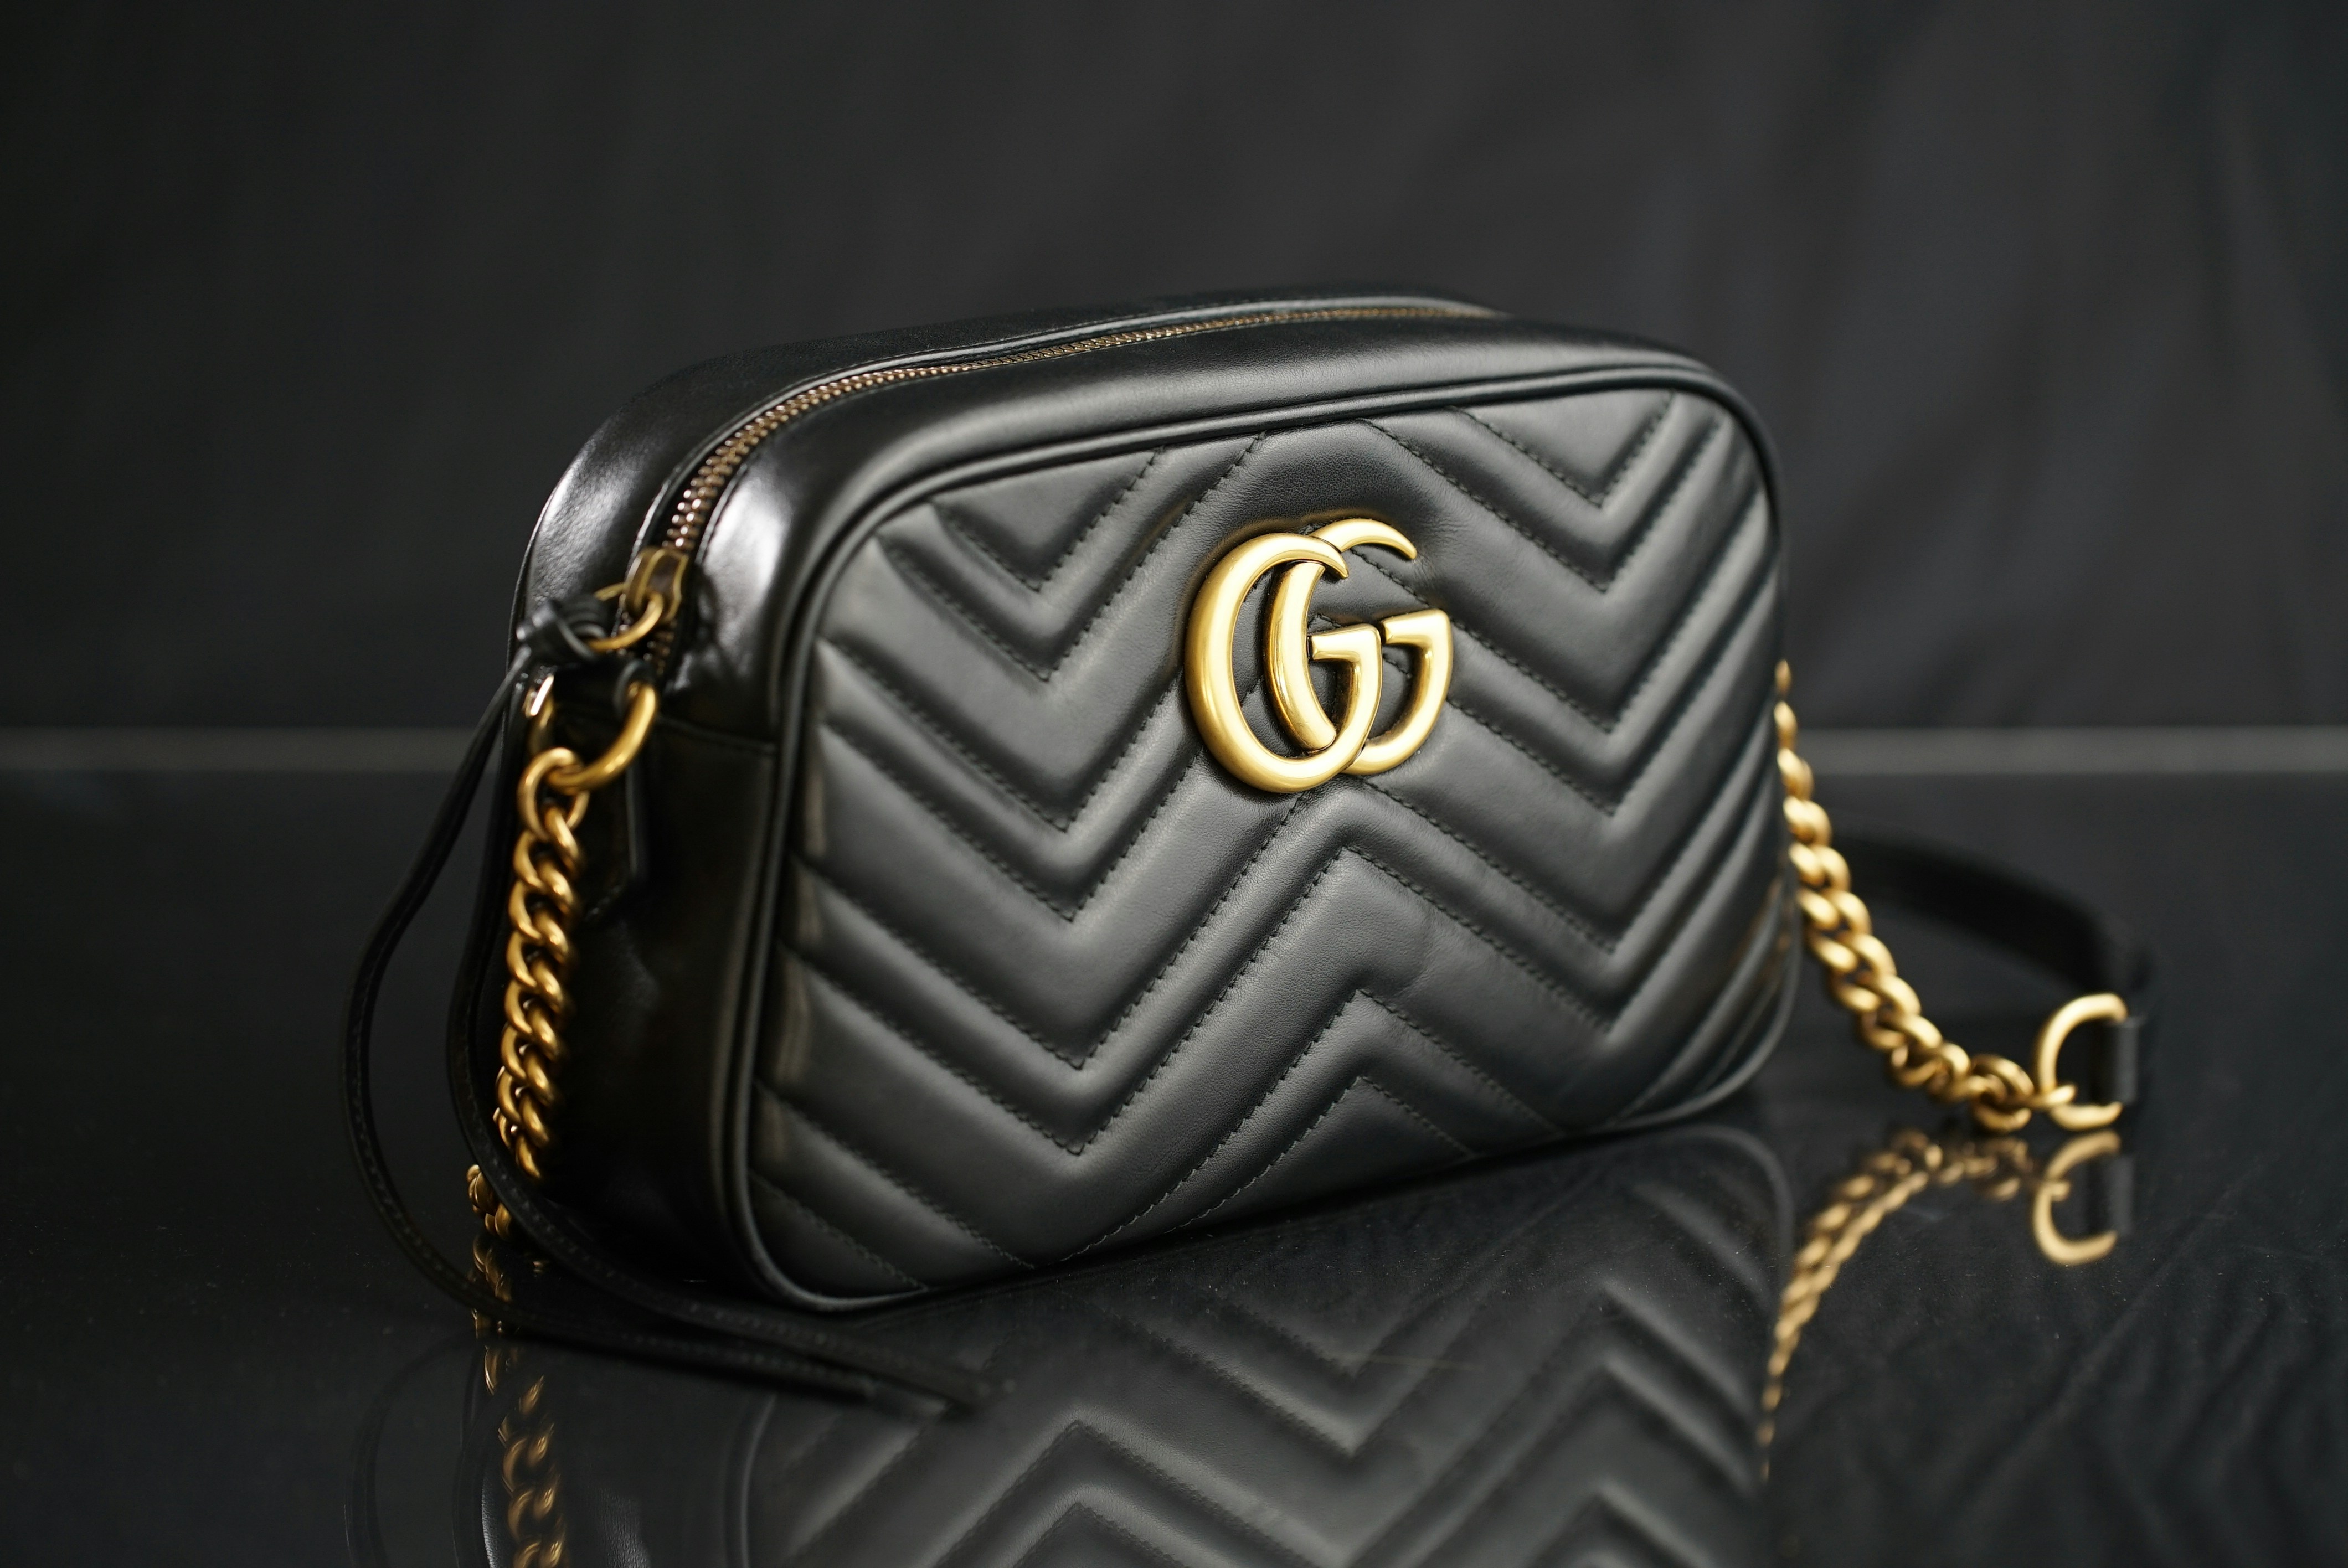 Gucci Bag Pictures | Download Free 